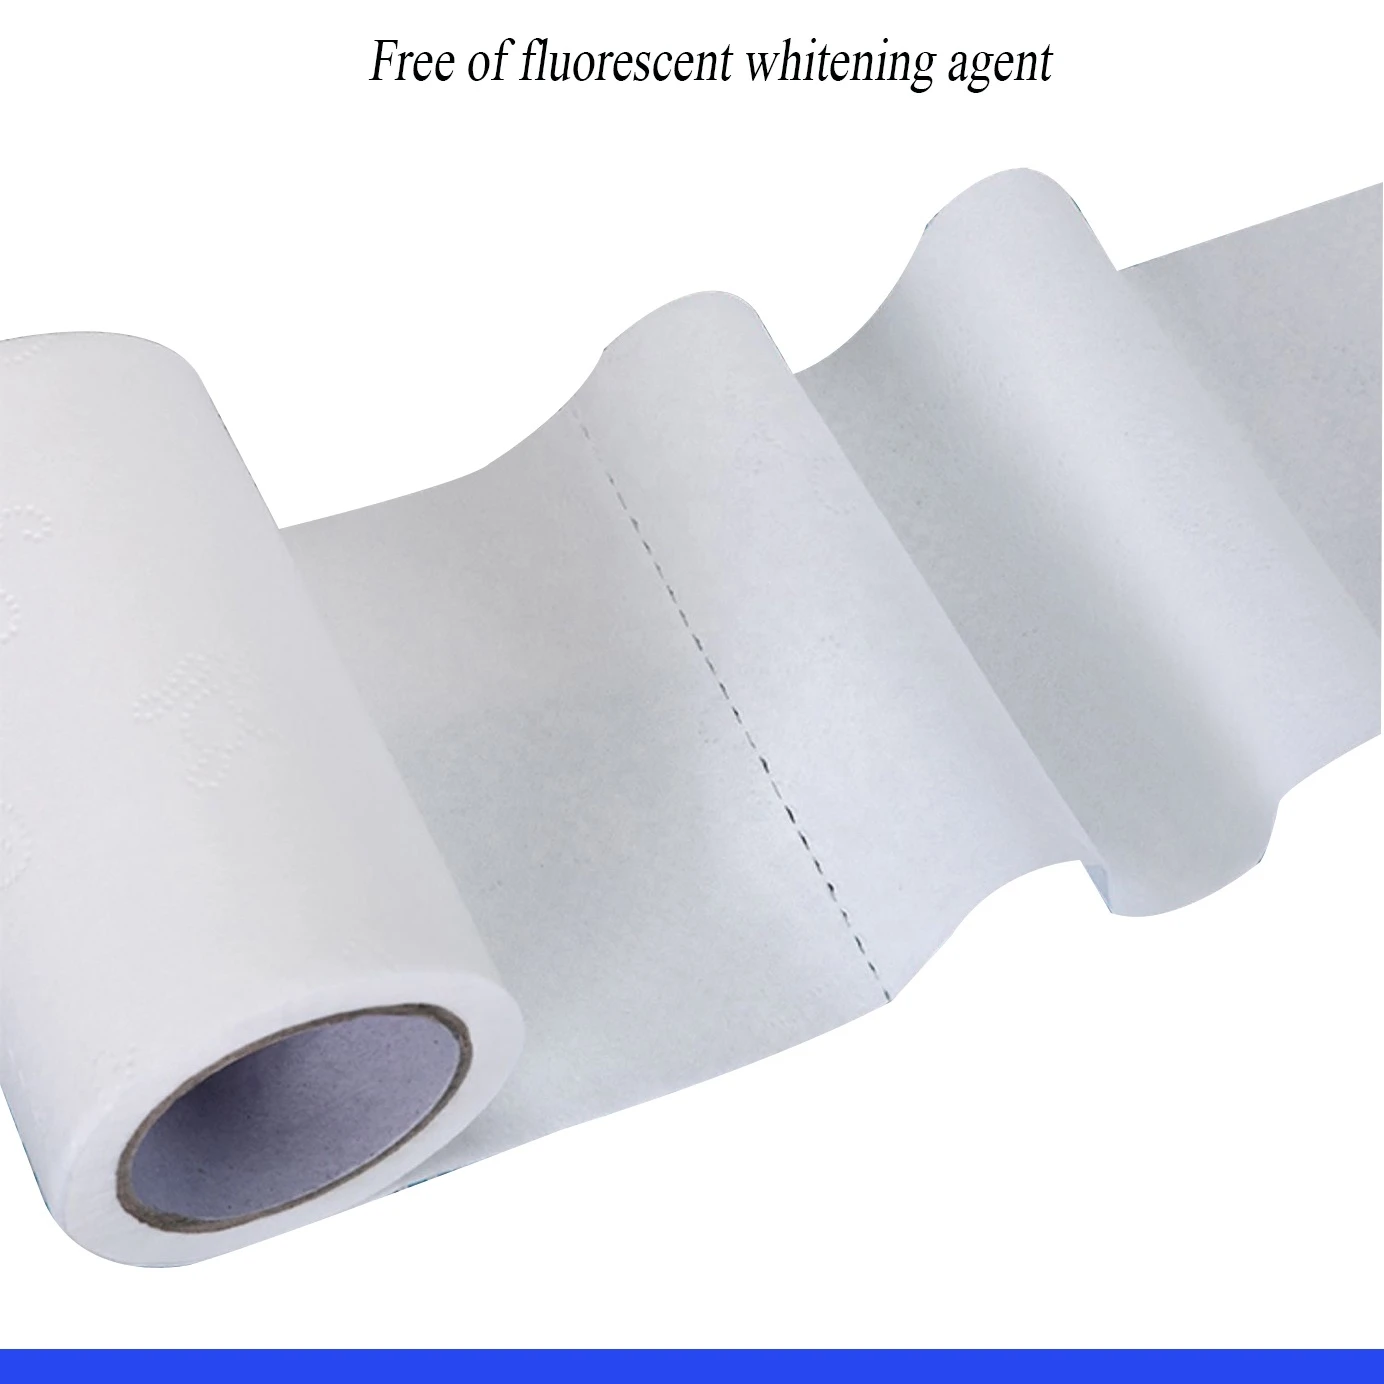 Flushable Individual Paper Wrapper Hygienic Bathroom Toilet Tissue Roll